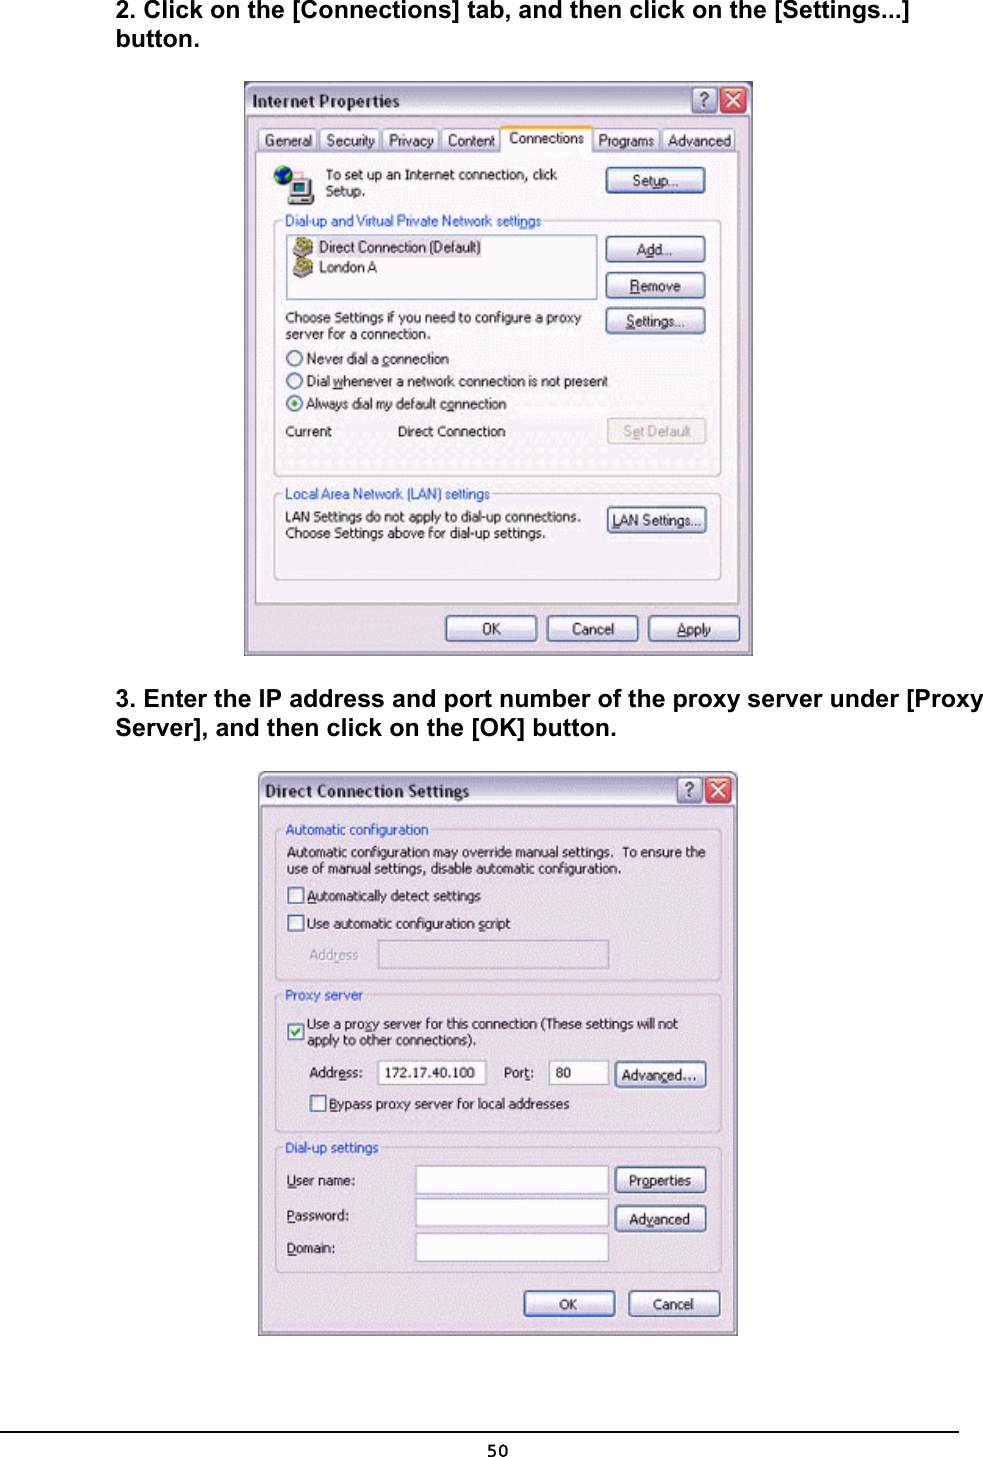  2. Click on the [Connections] tab, and then click on the [Settings...] button.  3. Enter the IP address and port number of the proxy server under [Proxy Server], and then click on the [OK] button.   50